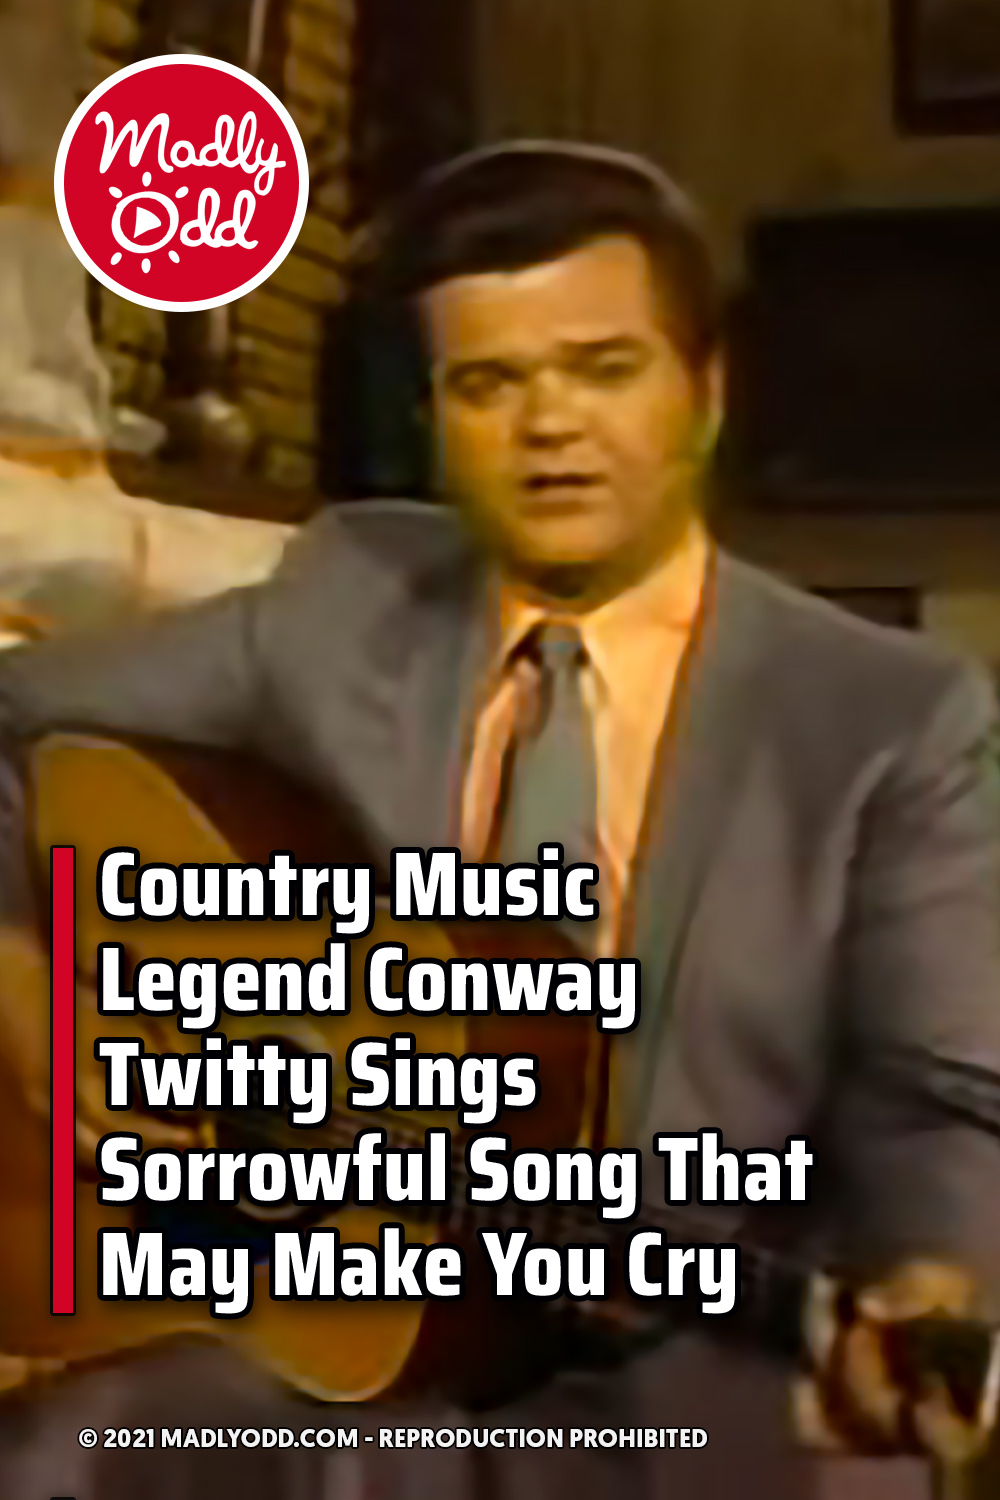 Country Music Legend Conway Twitty Sings Sorrowful Song That May Make You Cry